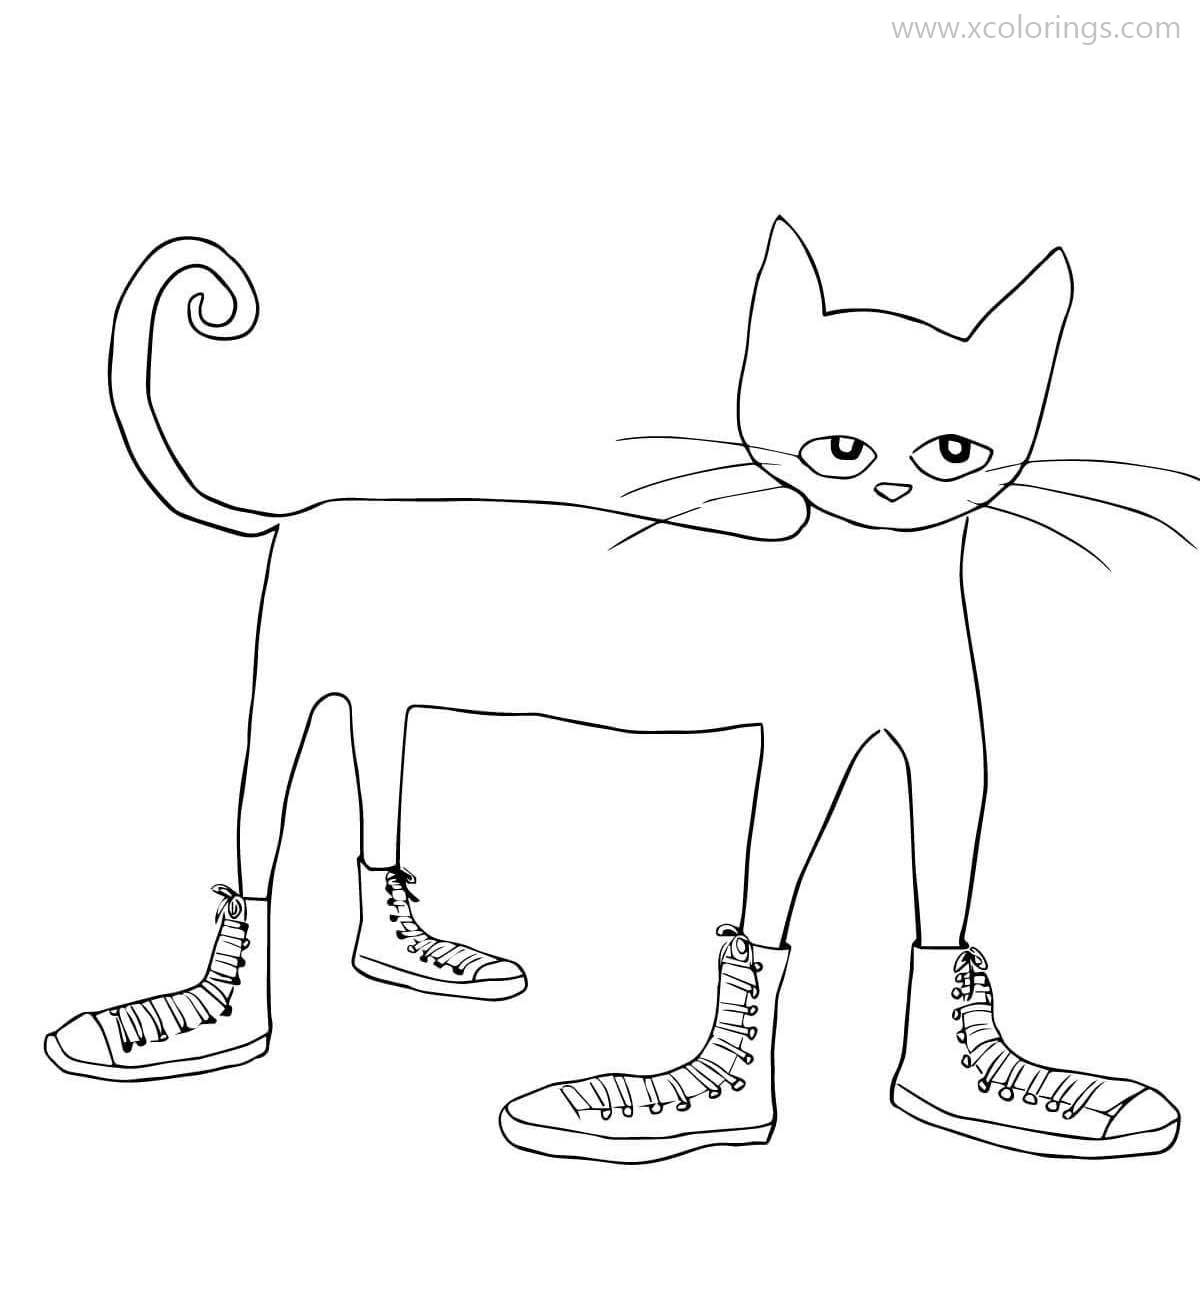 Free Pete The Cat Coloring Pages Free to Print printable